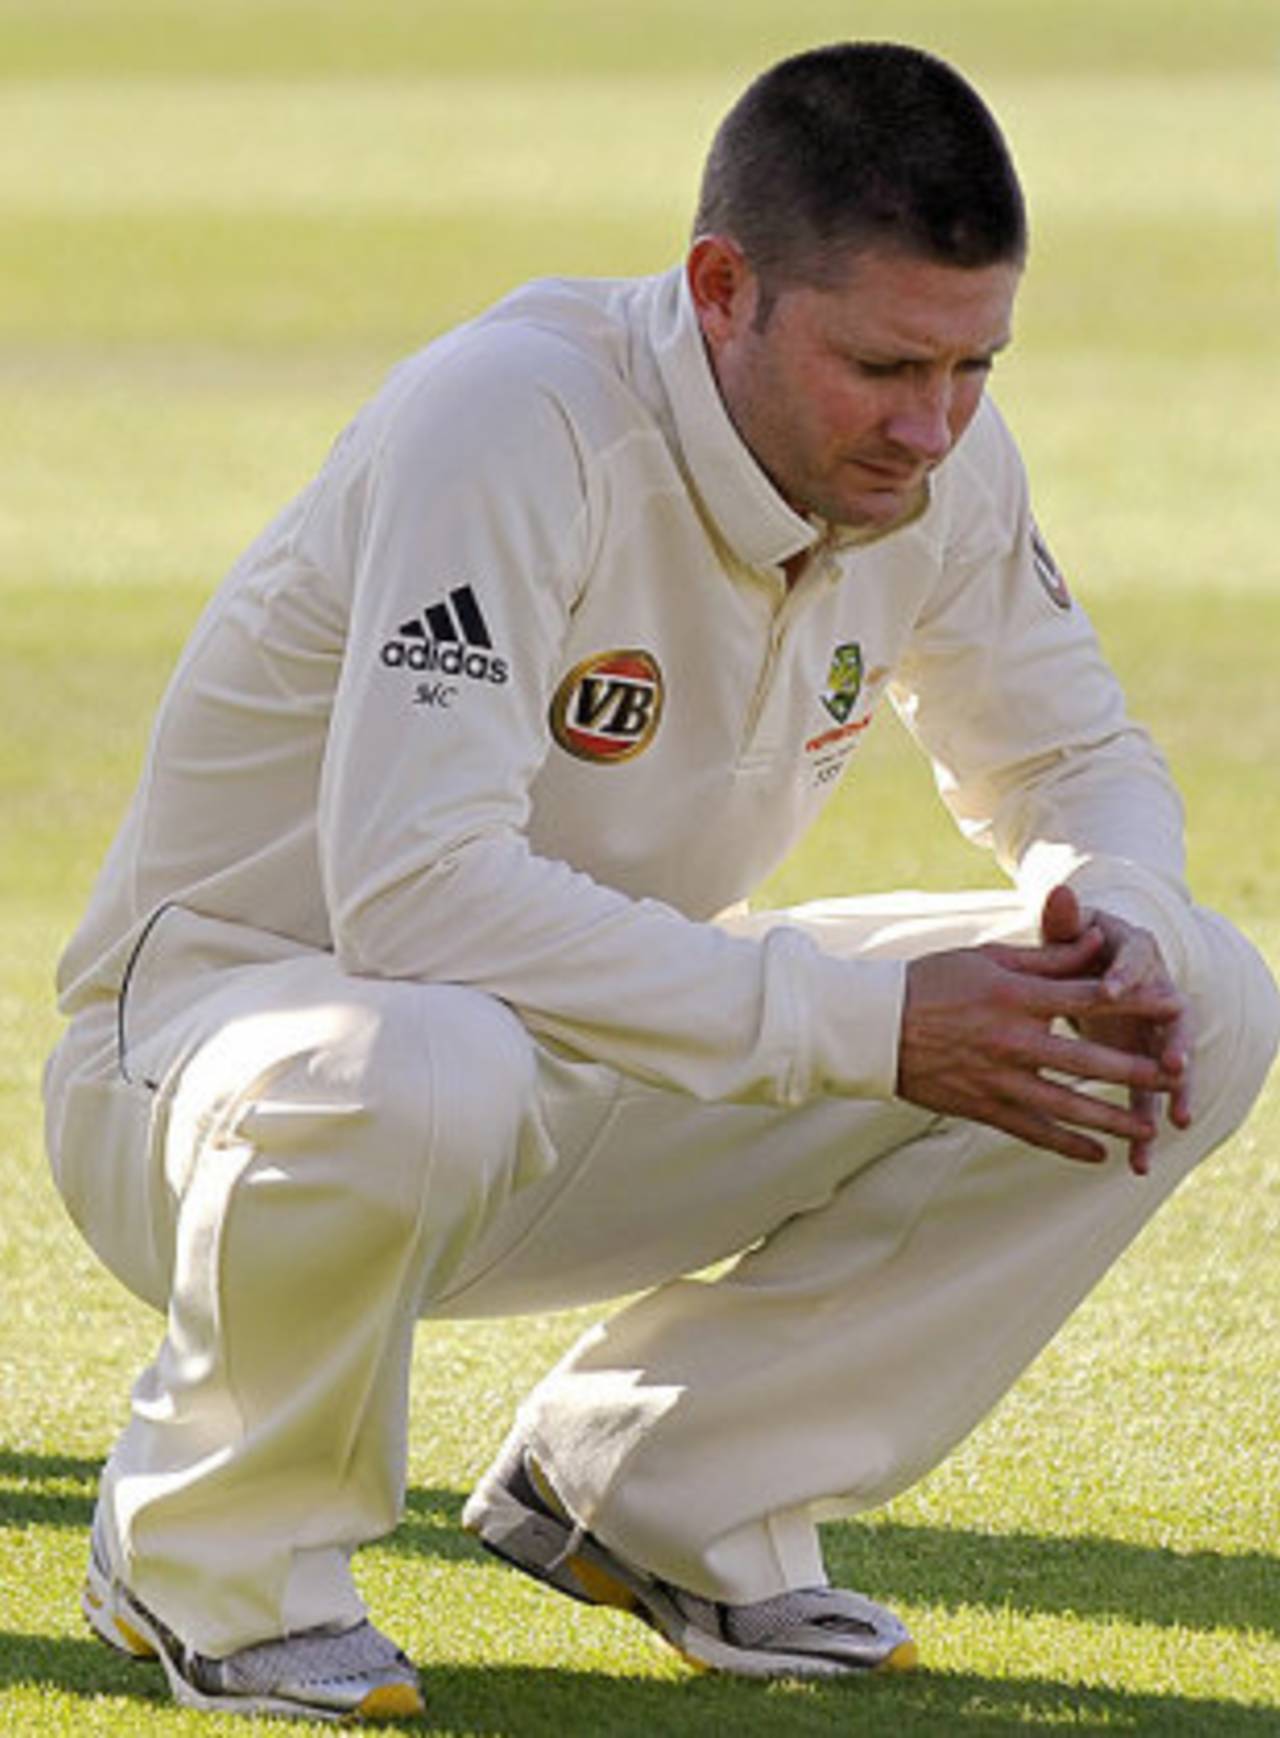 The Ashes loss hurt for Michael Clarke but he hopes not to be distracted this summer by thoughts of revenge next season&nbsp;&nbsp;&bull;&nbsp;&nbsp;AFP